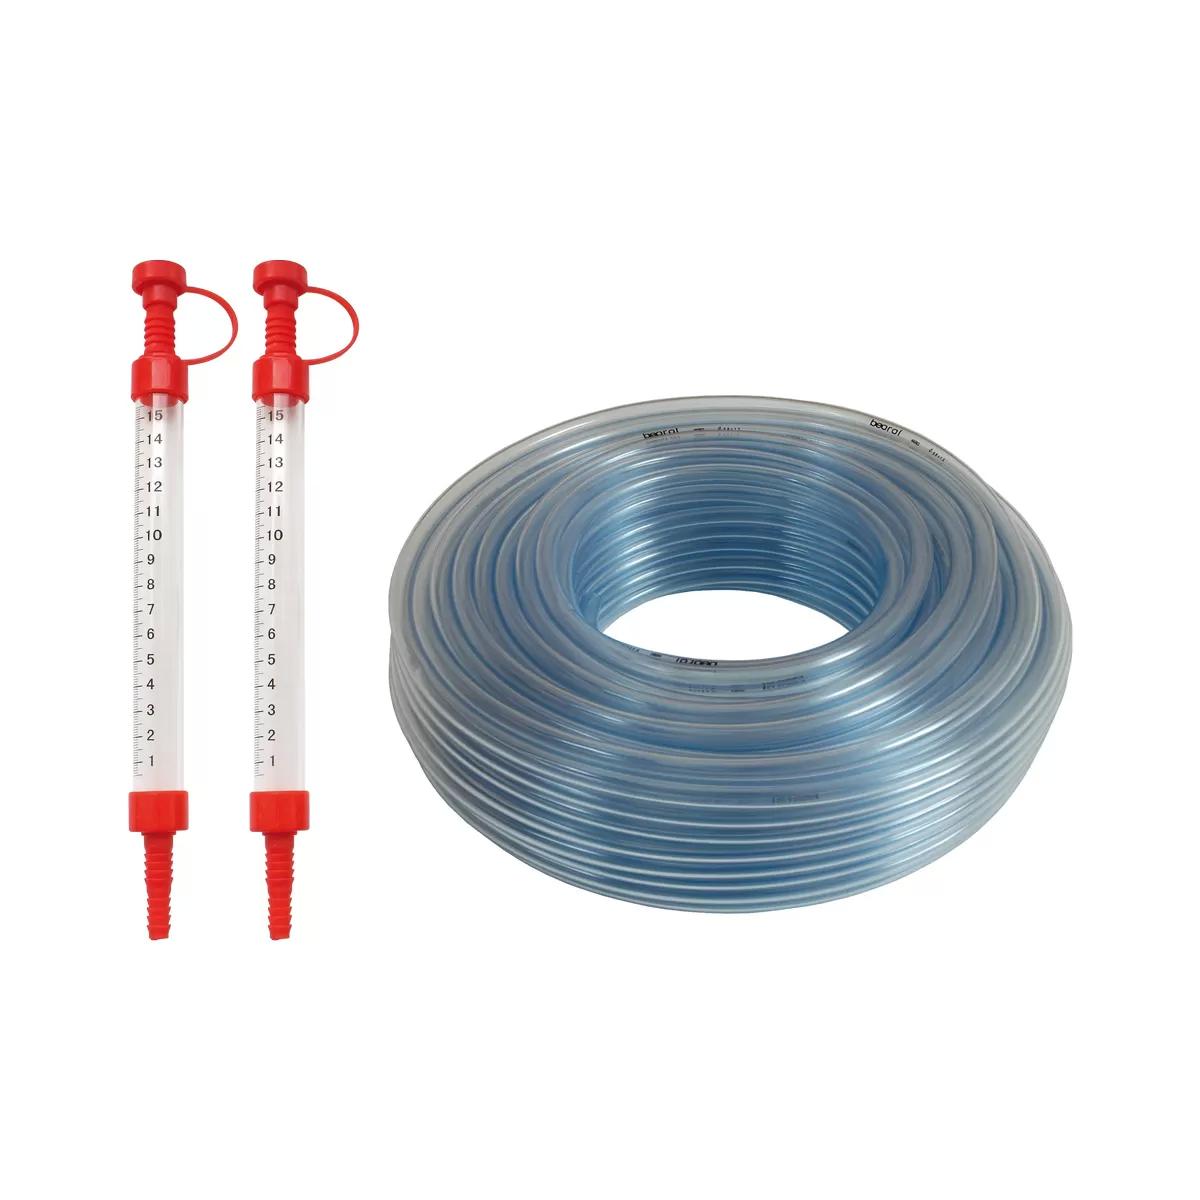 Water level hose + scale 65 ft / 20m 